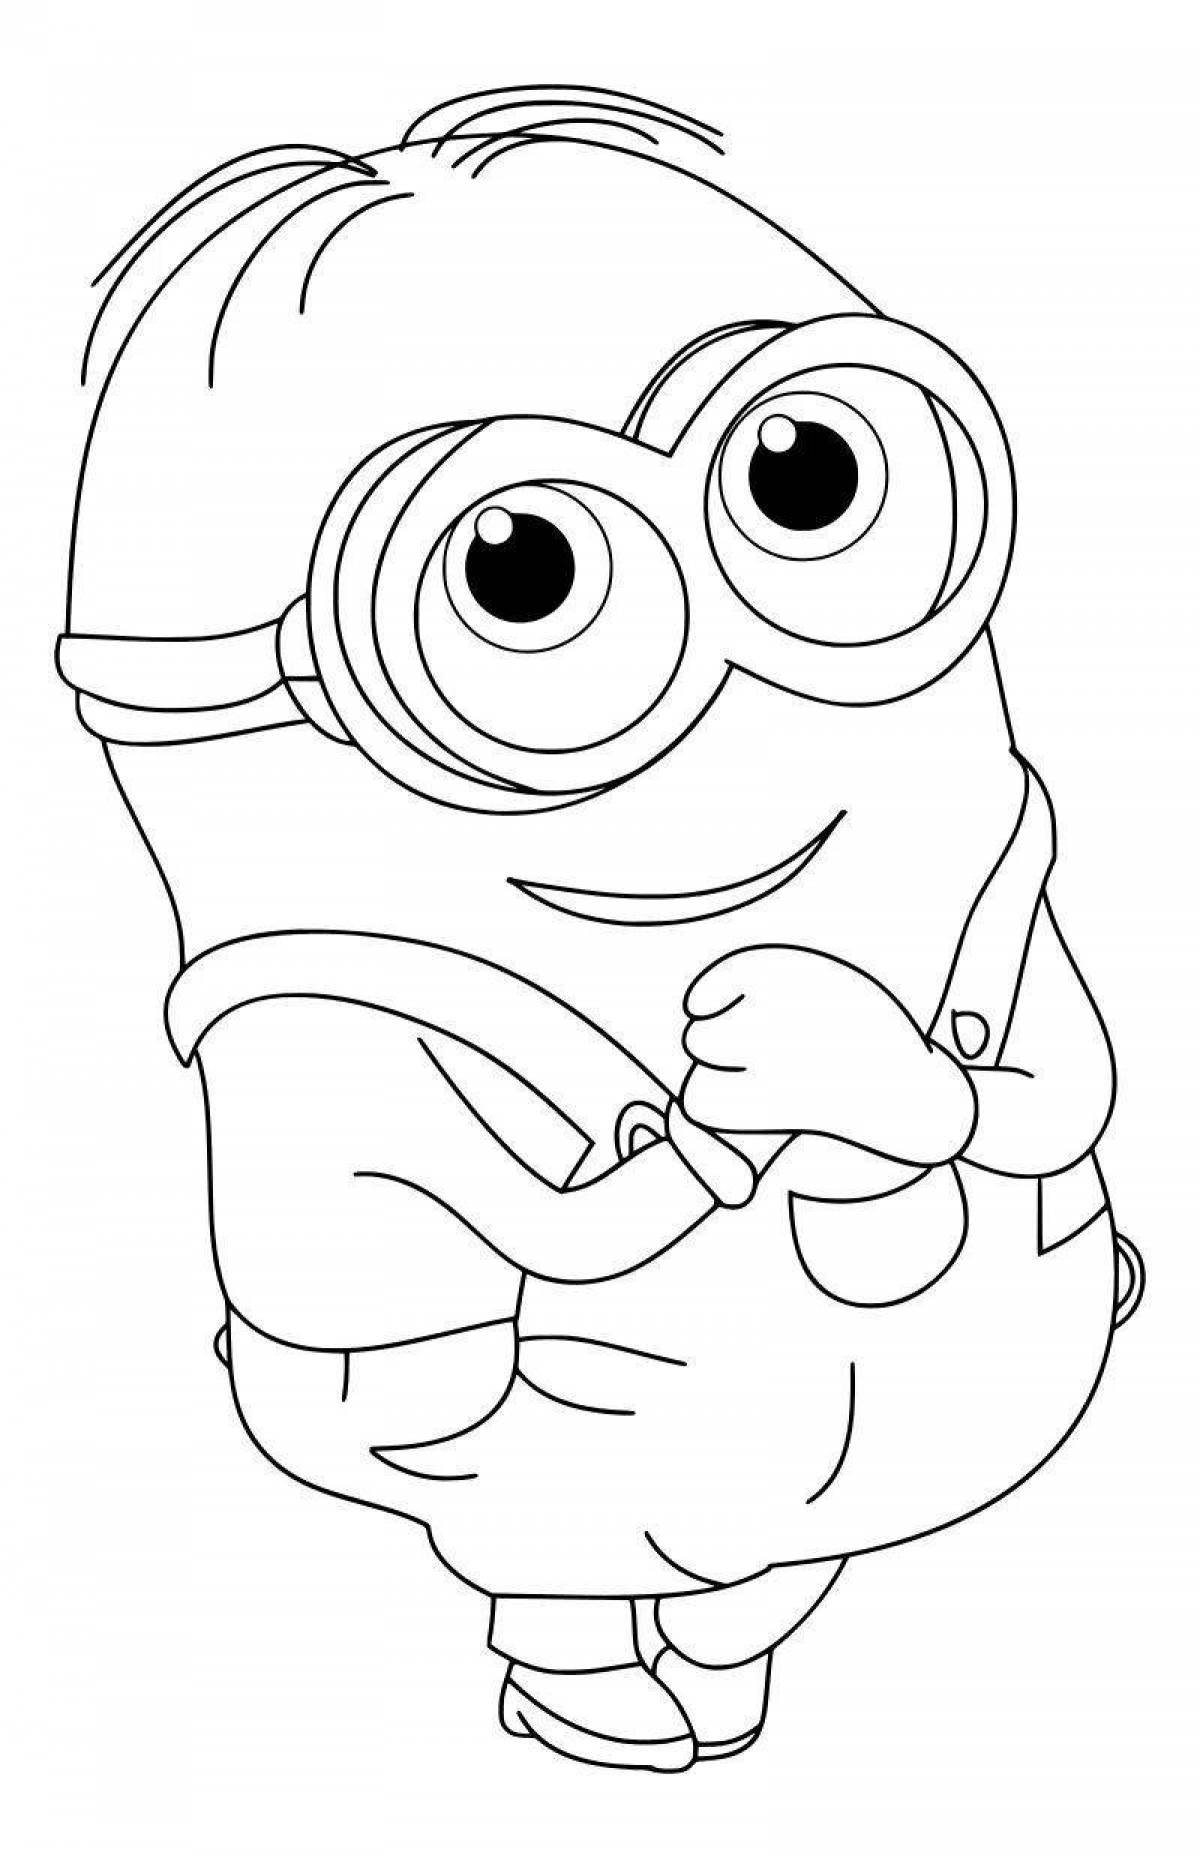 Amazing minion coloring book for kids